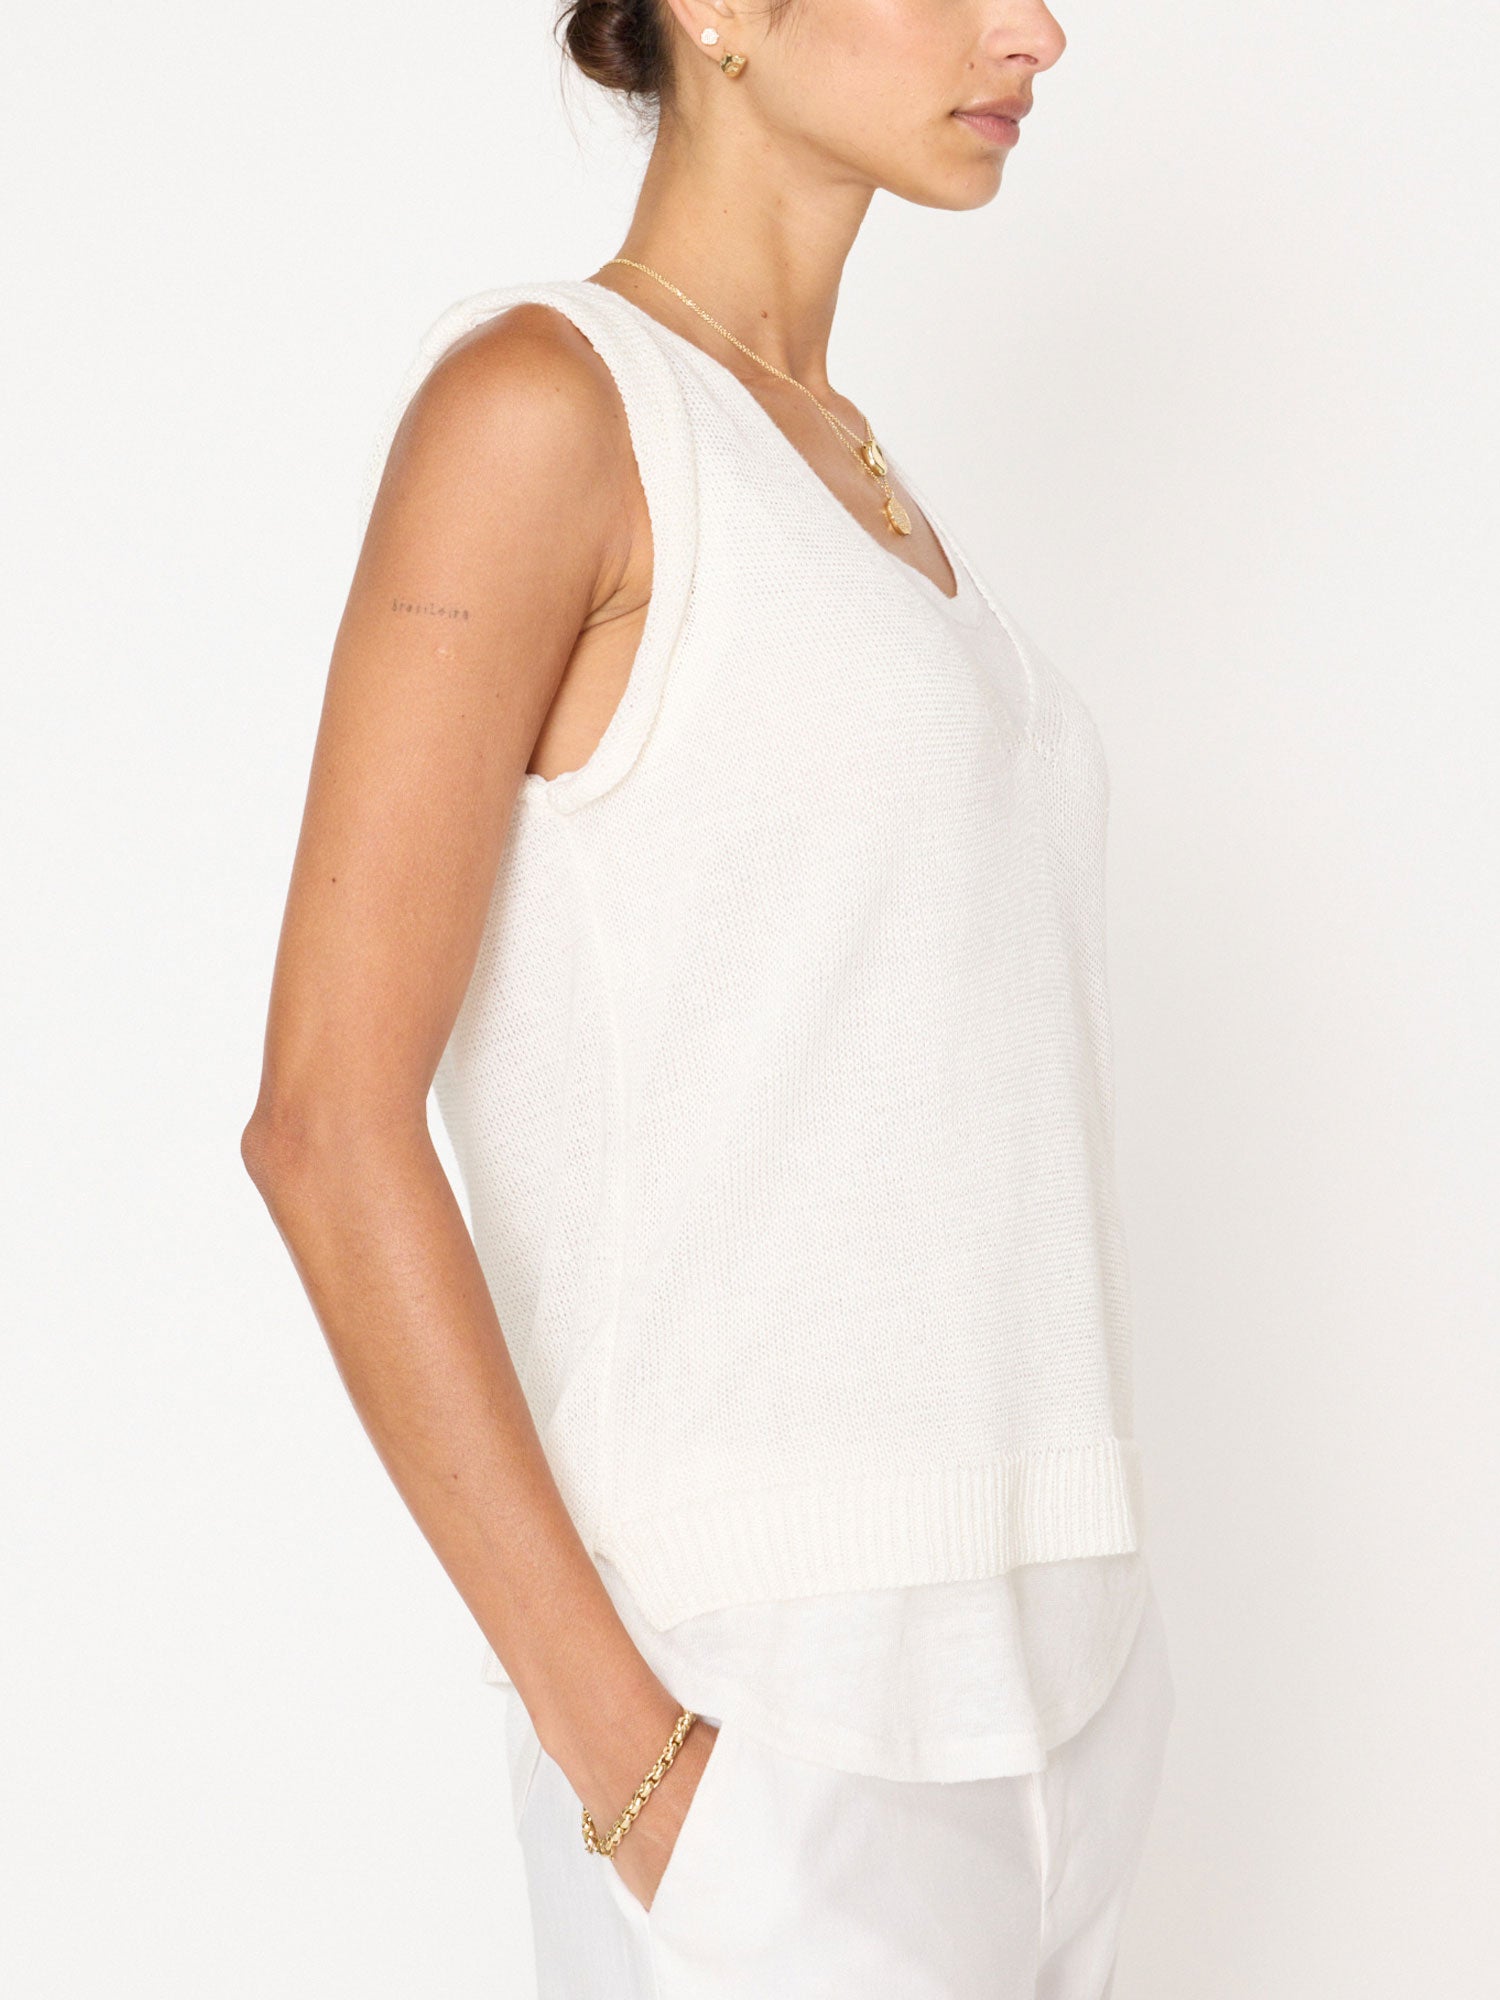 Morrow white layered V-neck tank top side view 